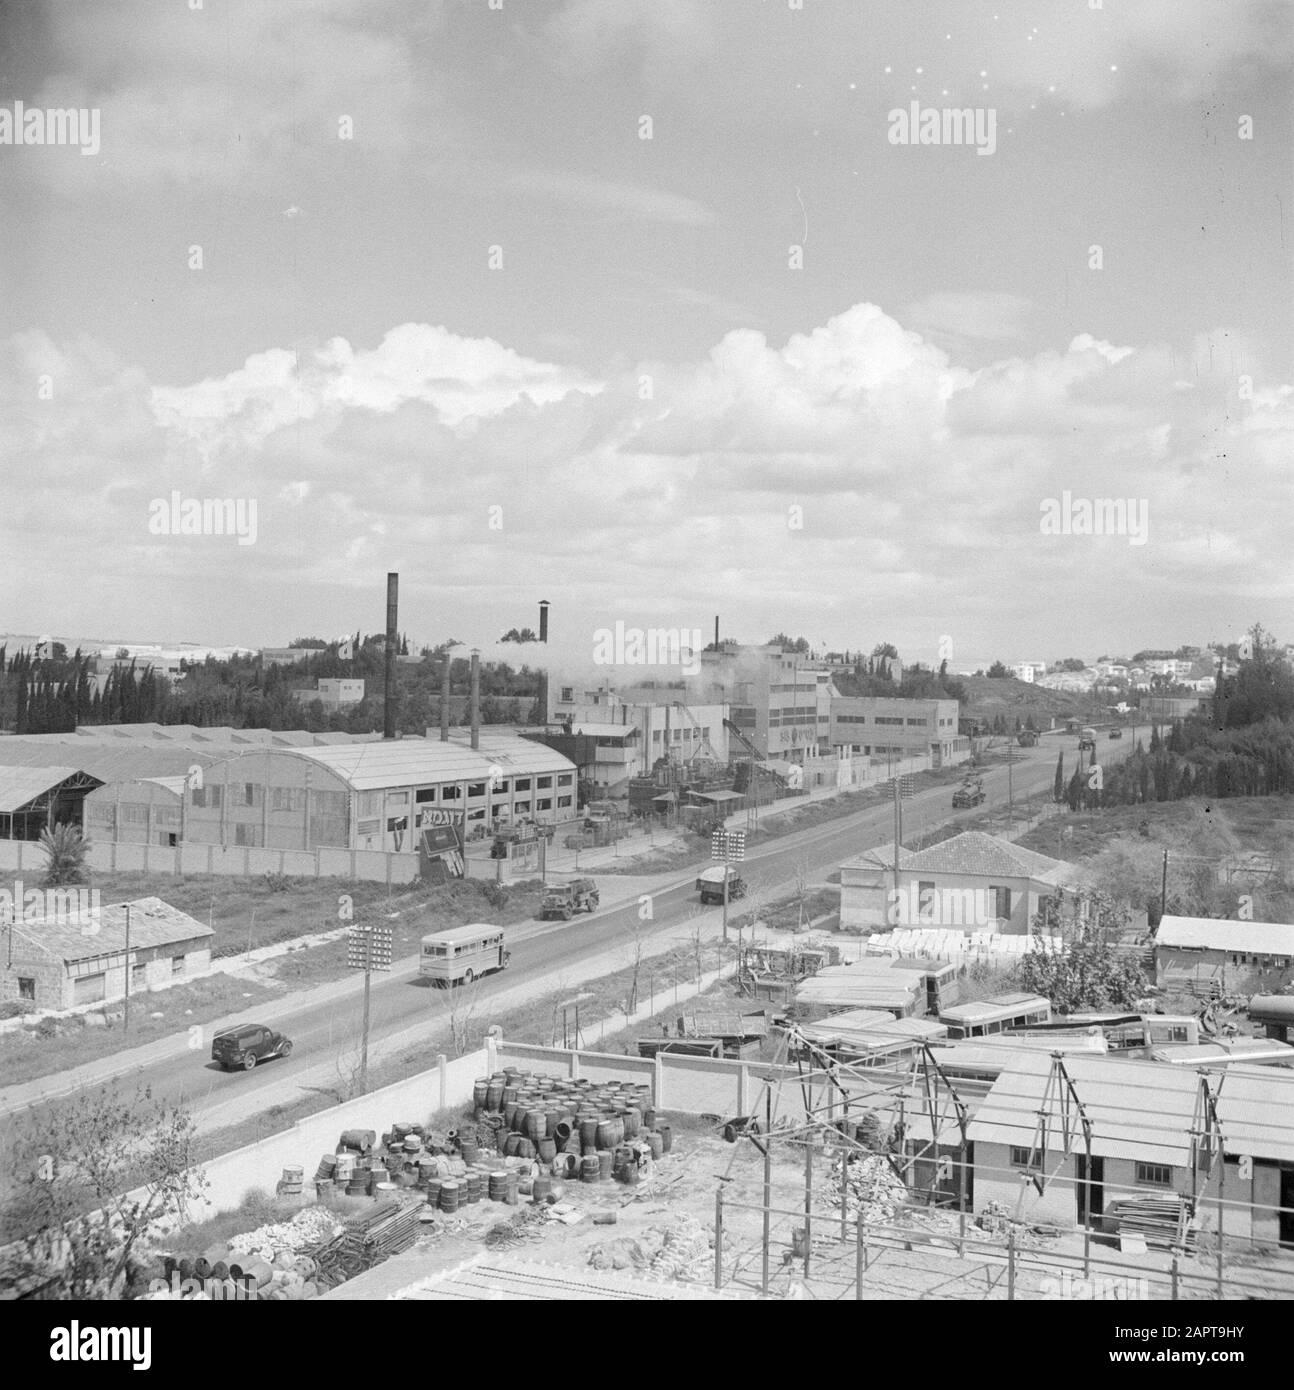 Israel 1948-1949  Buildings of the citrus juice factory Assis on the road from Tel Aviv to Haifa. On the road a.o. a bus and trucks with lower right new construction of production spaces Date: 1948 Location: Haifa, Israel, Tel Aviv Keywords: buses, industrial parks, citrus fruits, factories, fruit growing, industry, new construction, traffic, trucks, fruit juices Stock Photo